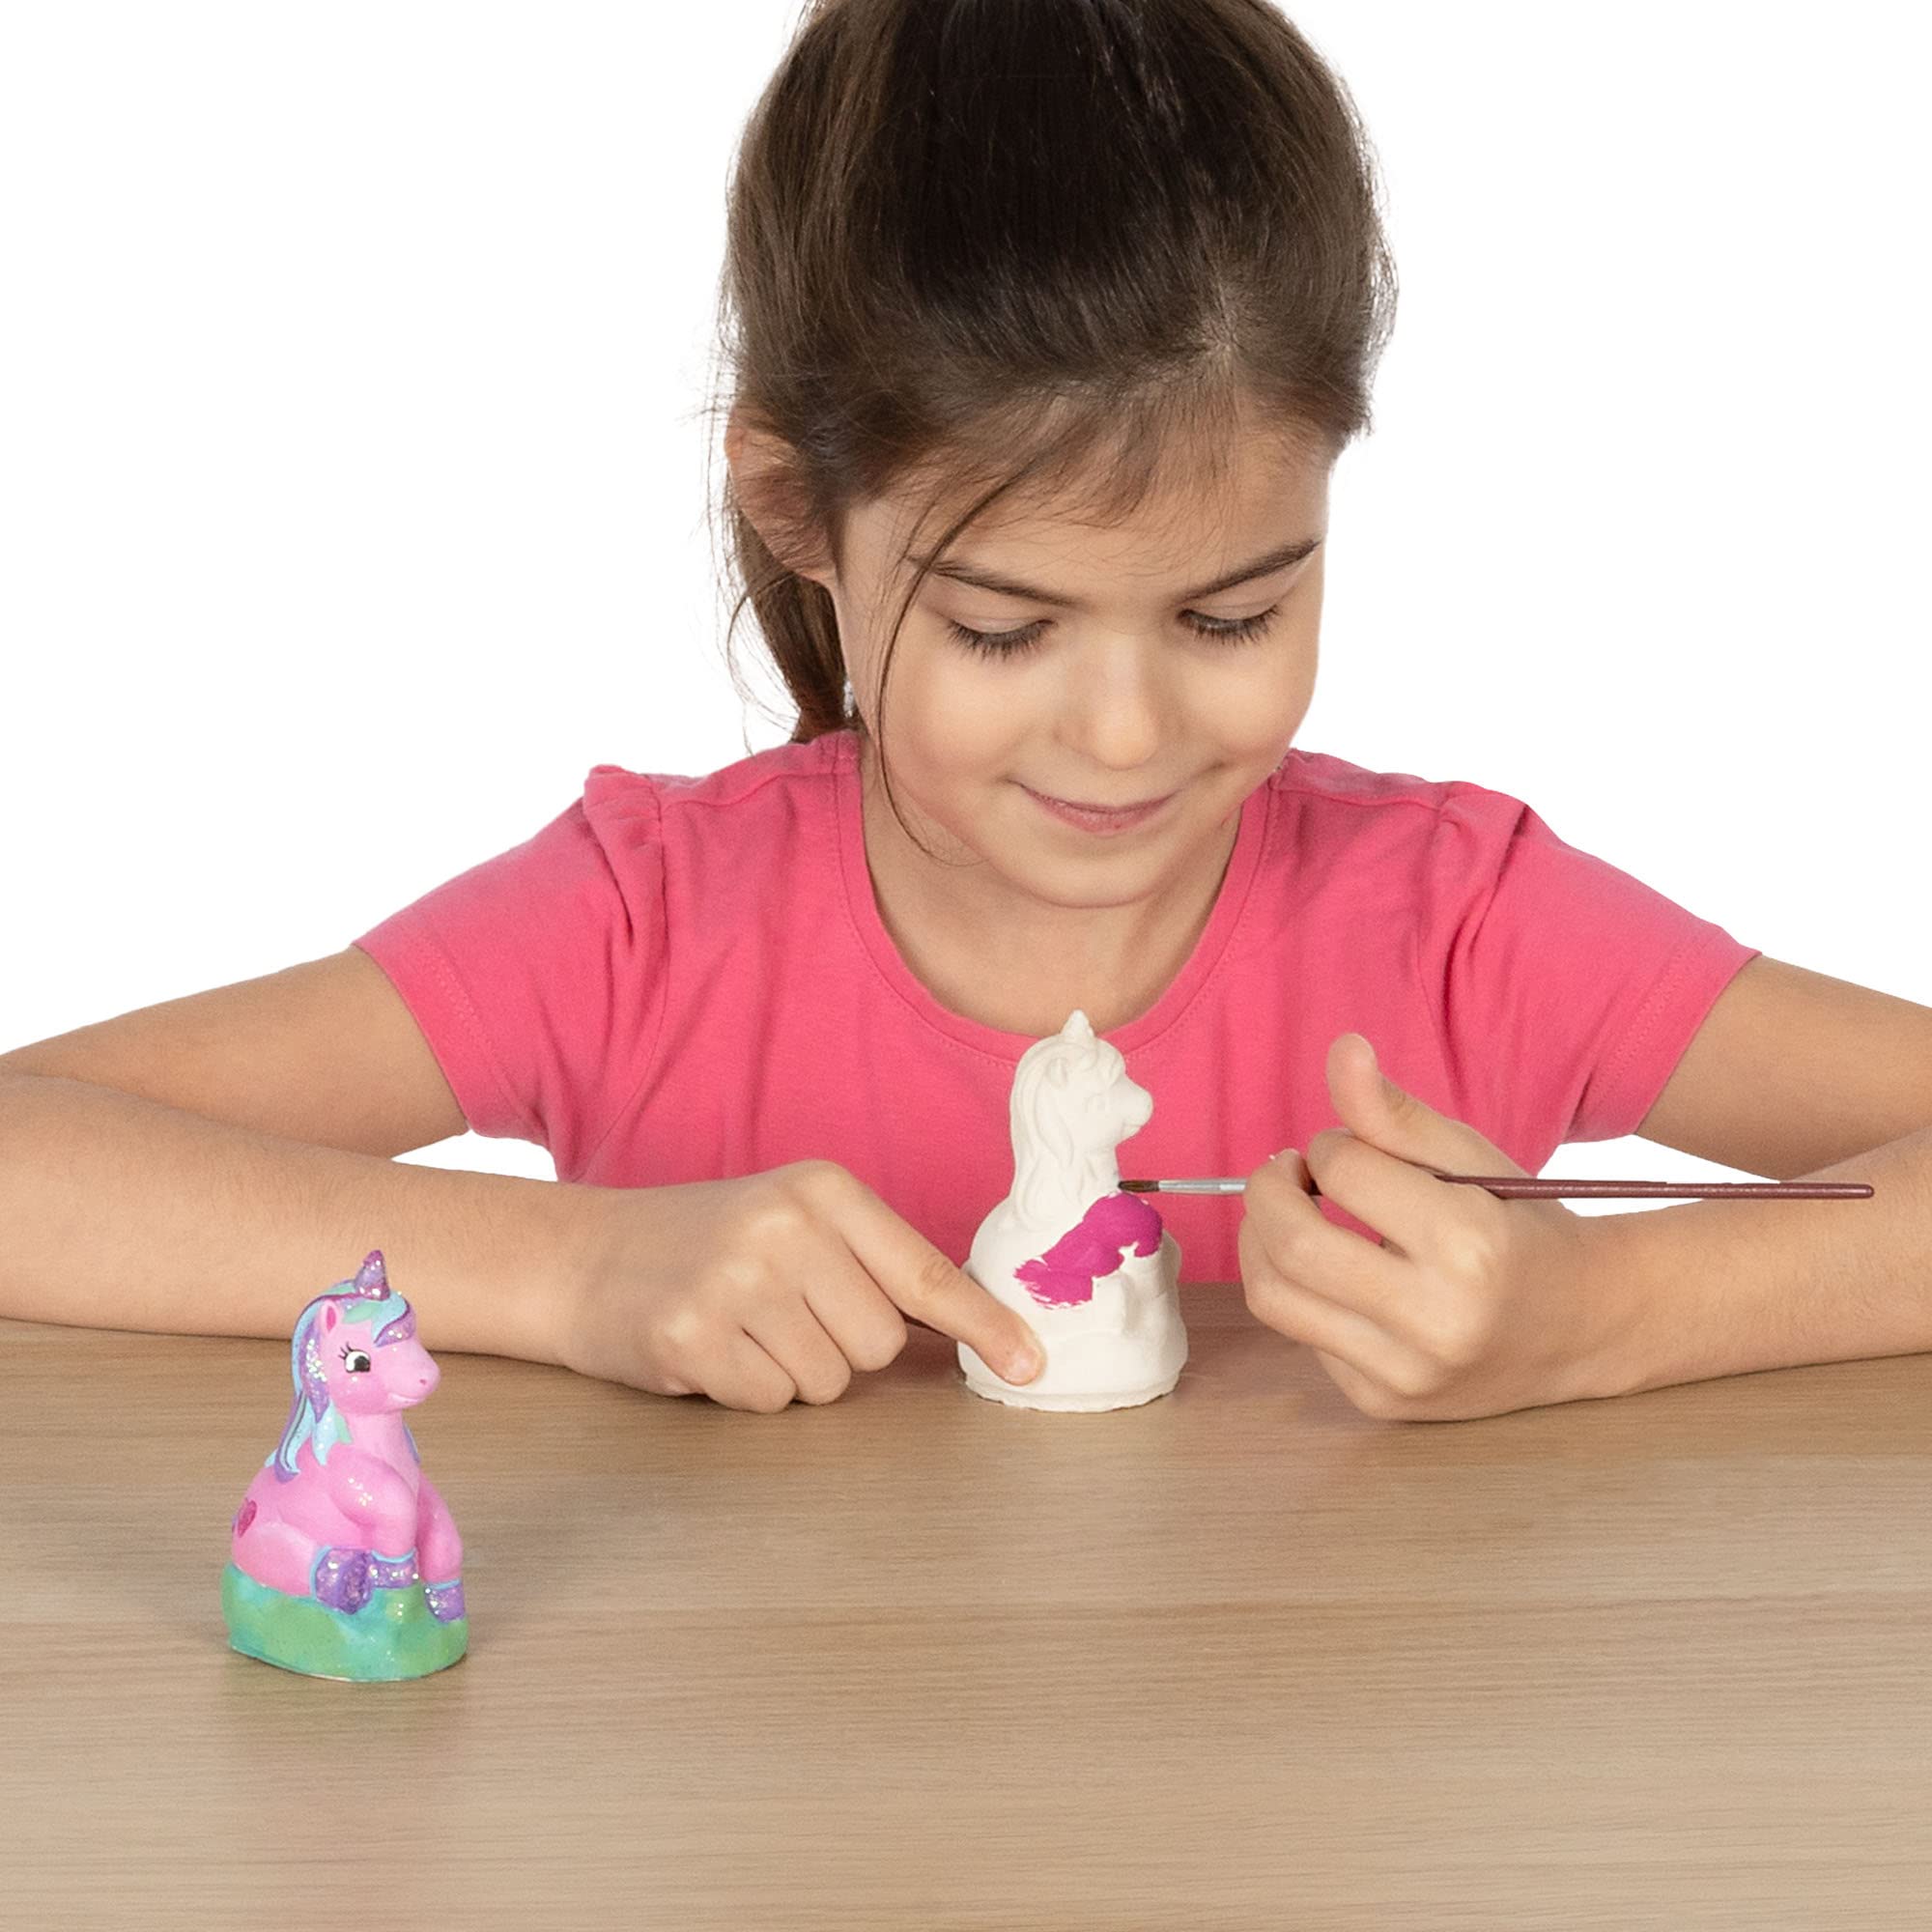 SES Creative 01299 Casting and Painting - Unicorn - Casting Plaster in 3D; Quick-Drying Plaster; The Detailed Mould yields Excellent Results; Encourages Creativity; Age 5+